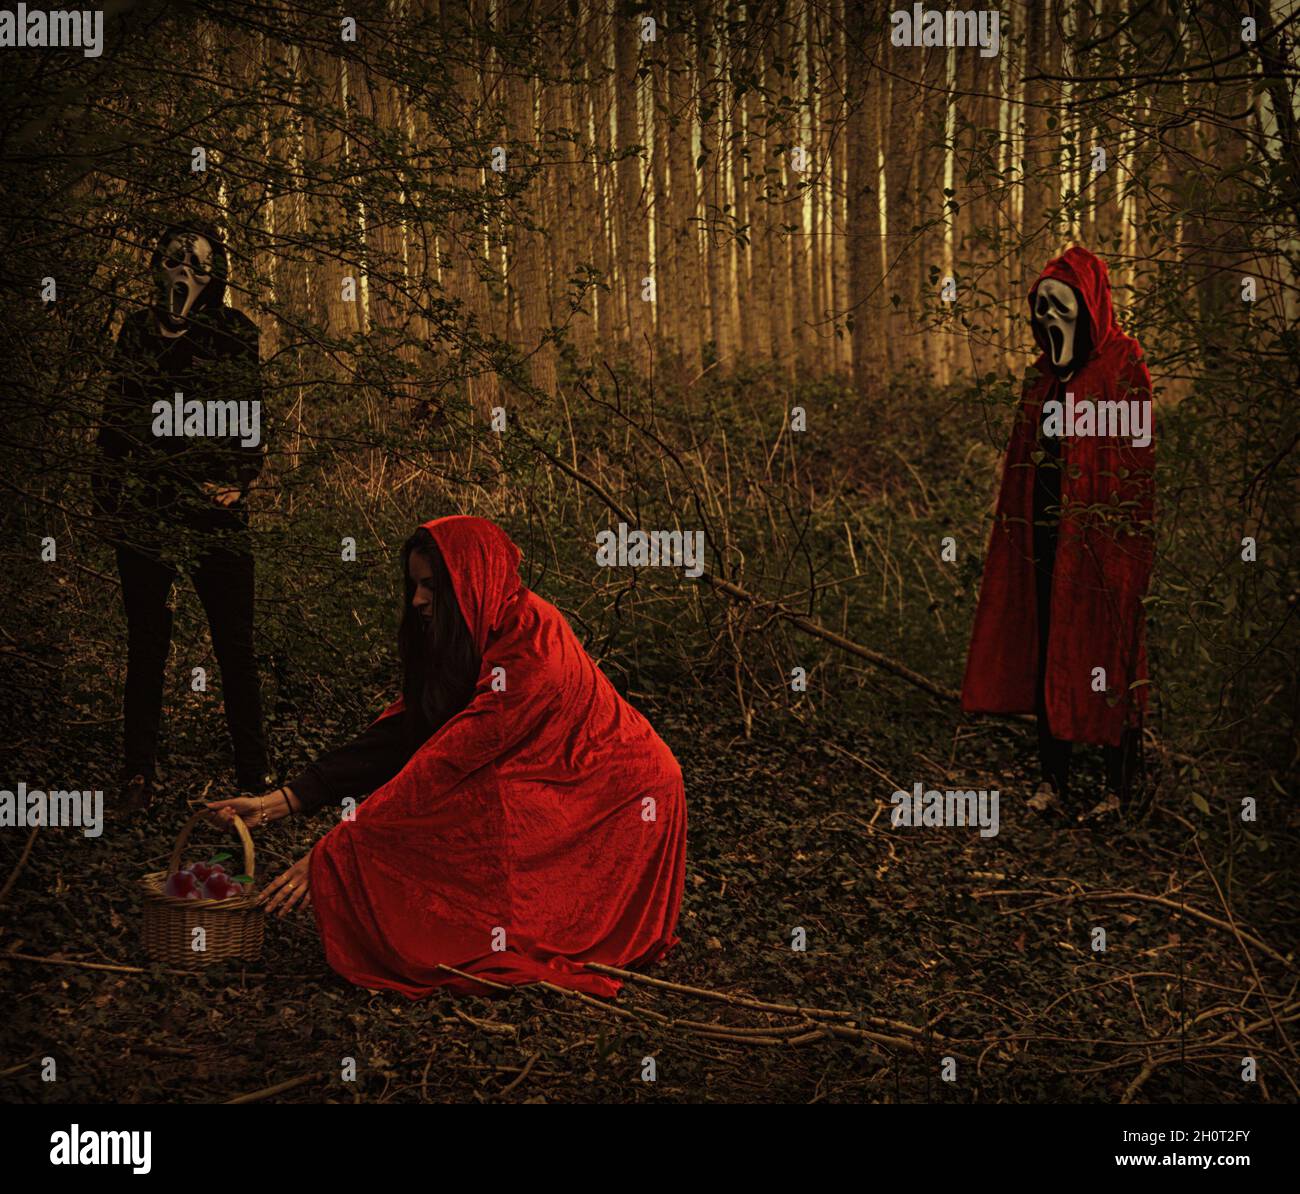 Little red riding Hood with masked person in black standing behind. Shot in shady woodland. Stock Photo